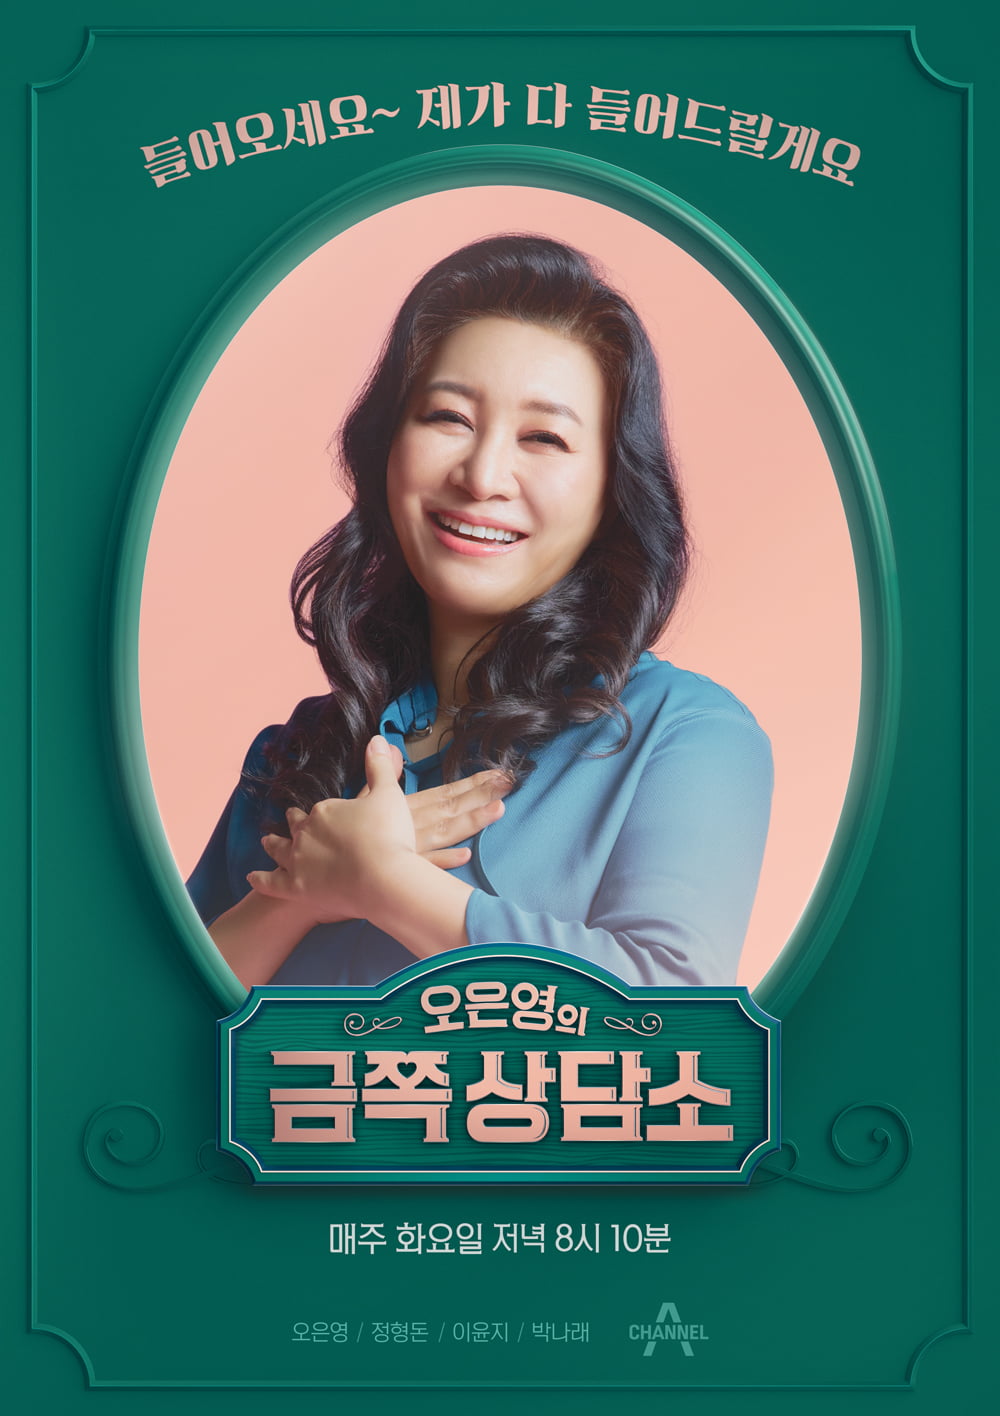 Oh Eun-young's 'Golden Counseling Center' rescheduled to Tuesday